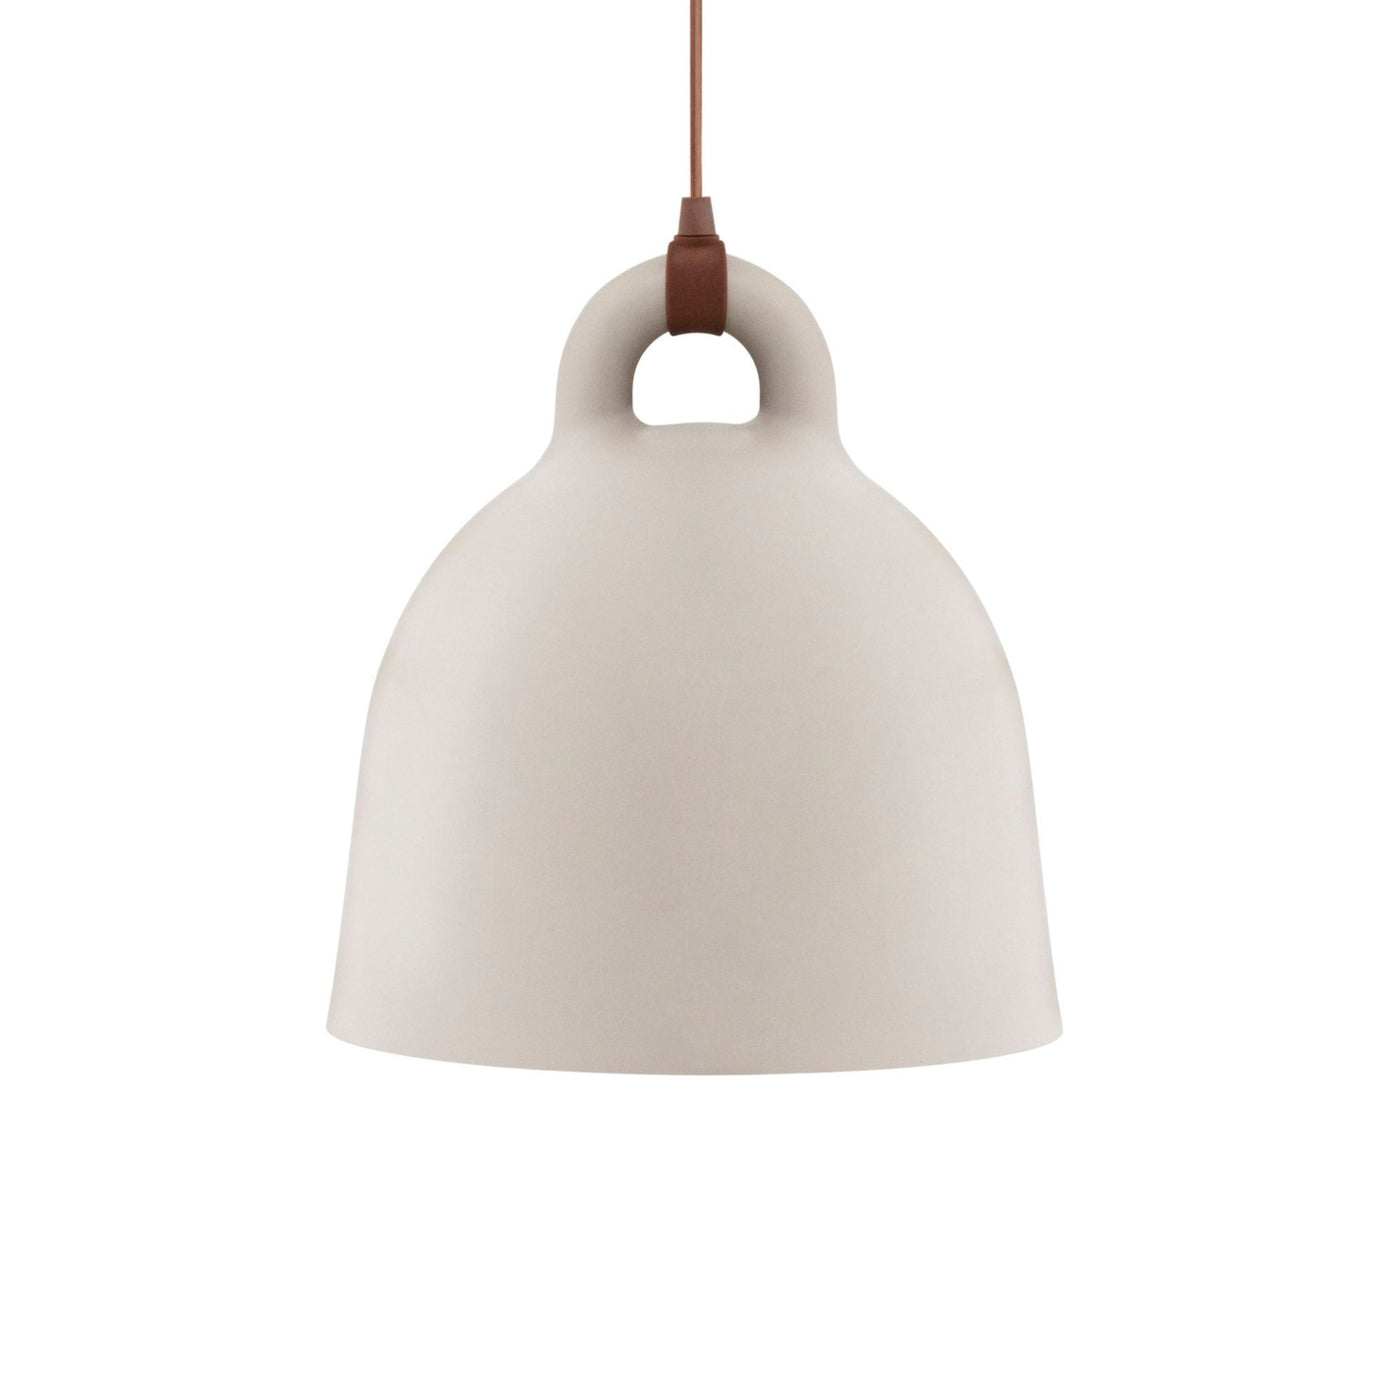 Norman Copenhagen Bell Pendant Lamp in sand. Free UK delivery from someday designs #size_large